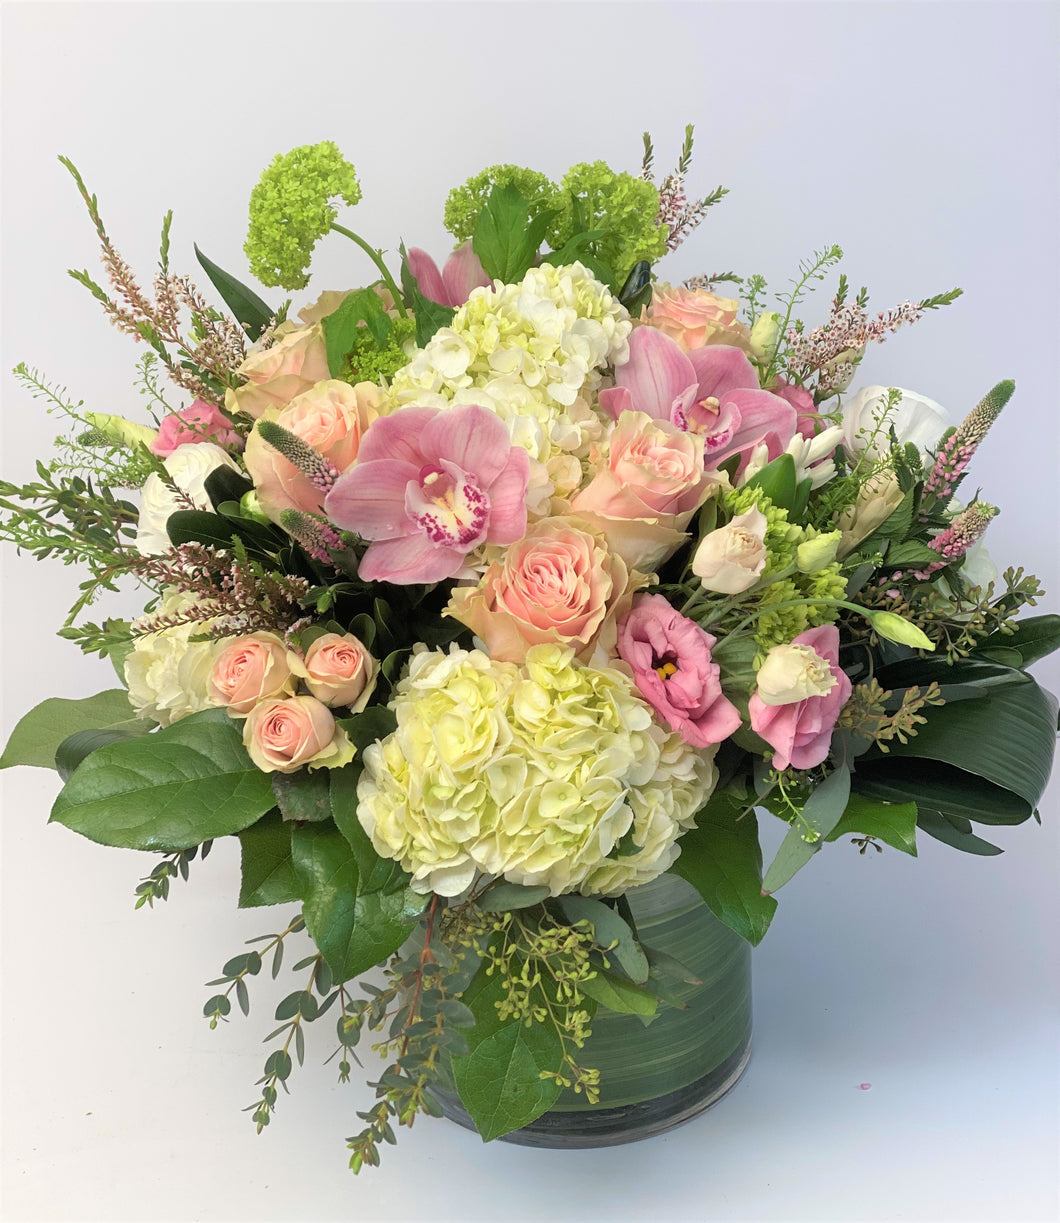 F203 - Lush White and Pink Vase Arrangement  (Orchid colour based on availability - white, pink or dark pink) - Flowerplustoronto